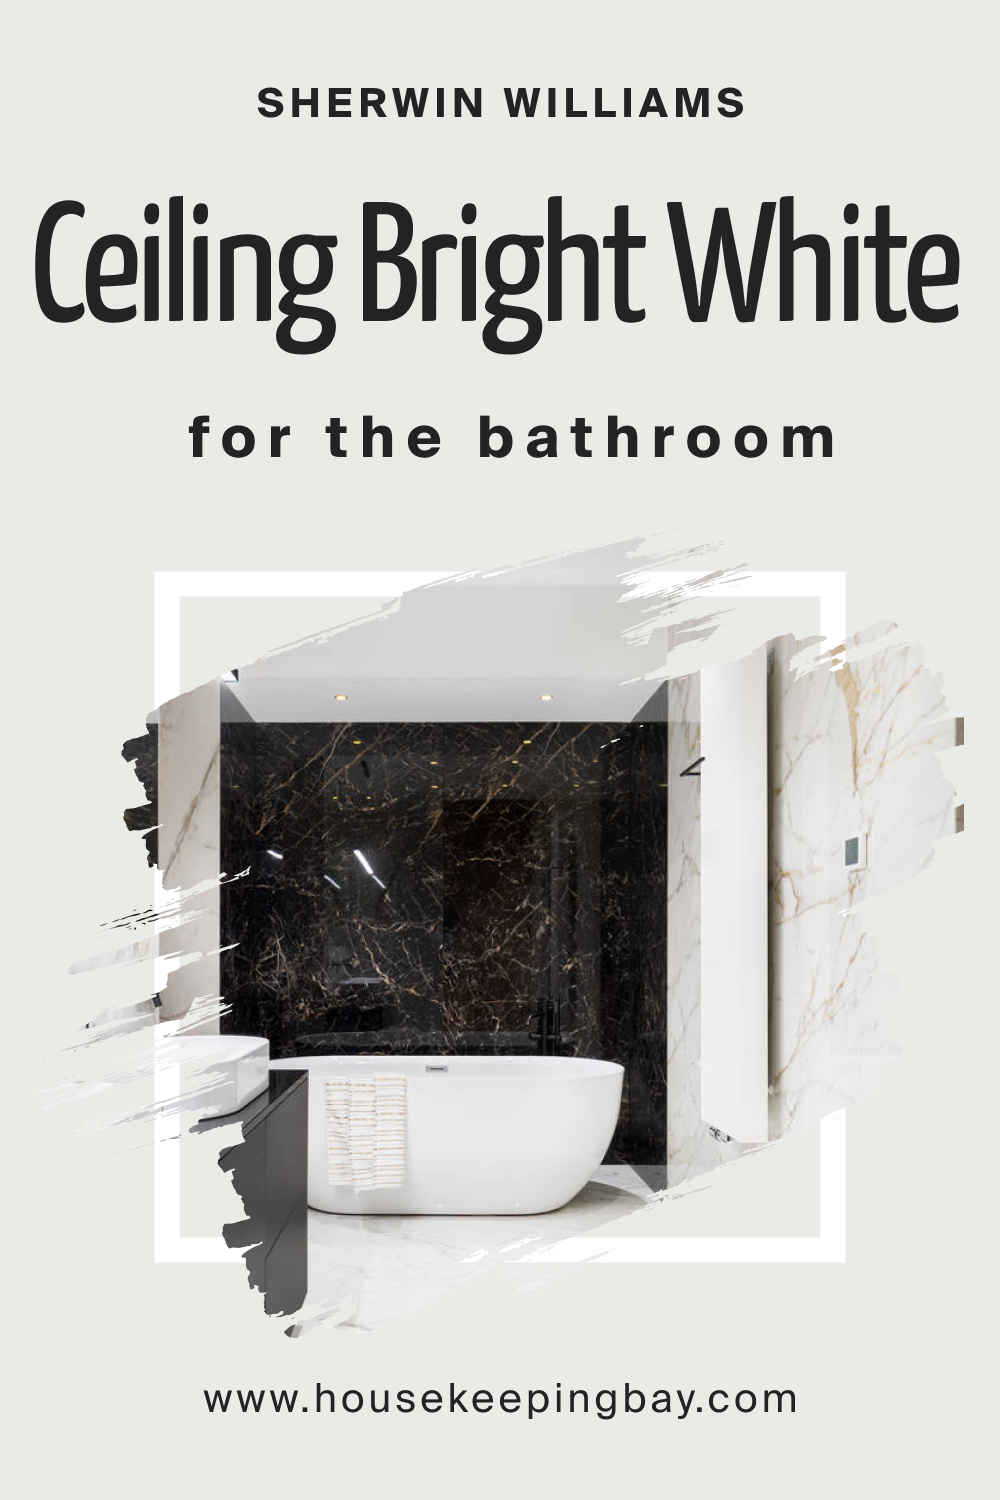 Sherwin Williams. SW Ceiling Bright White in the Bathroom